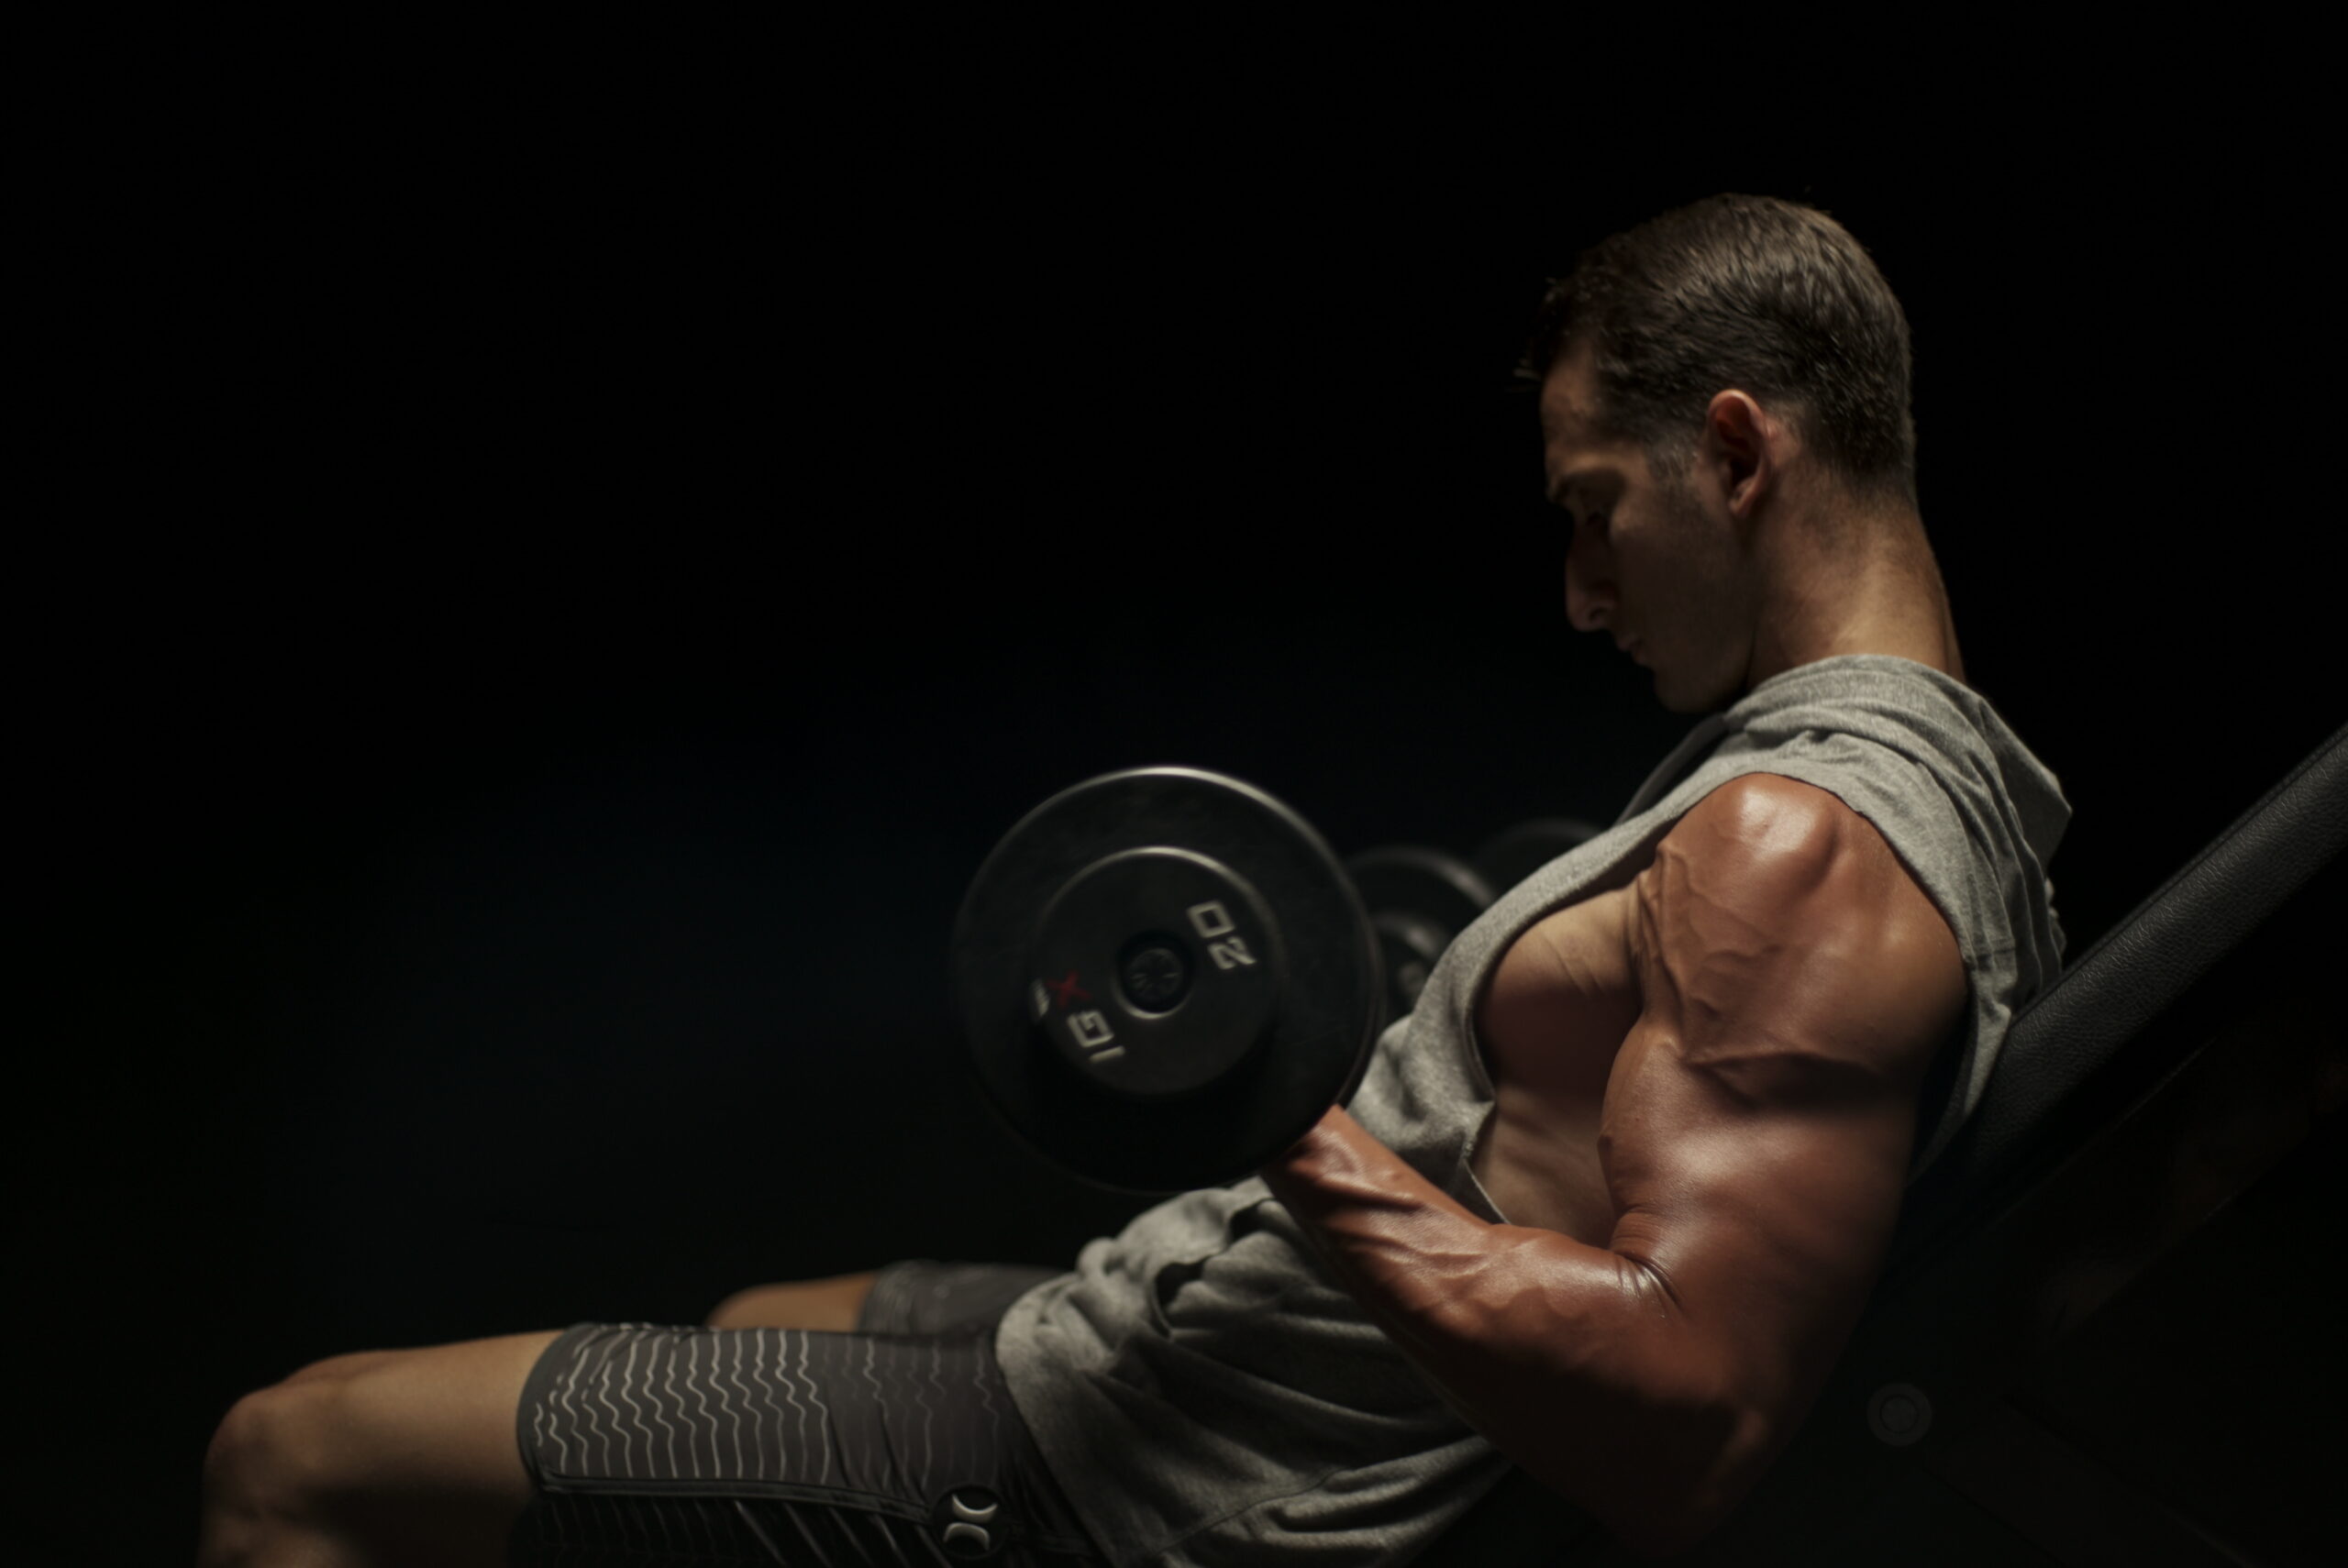 Proven Method for Building Muscle Mass in Athletes 